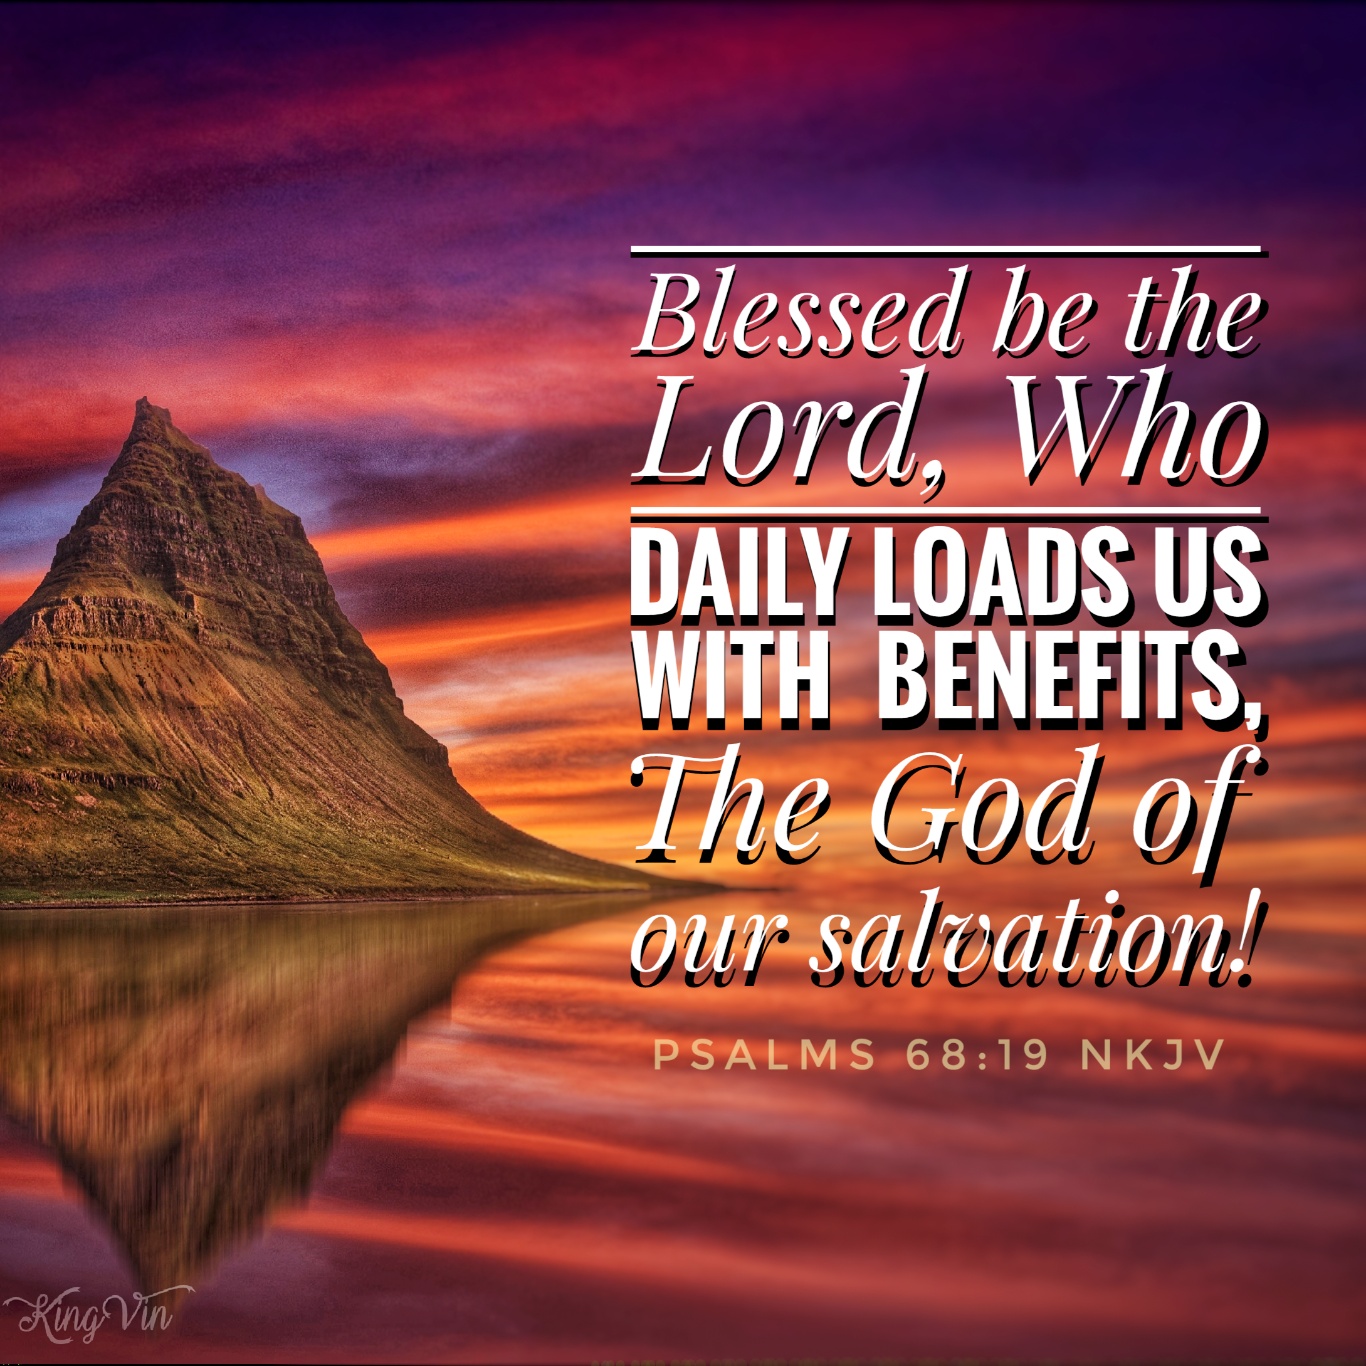 Blessed be the Lord, Who daily loads us with benefits, The God of our salvation! Selah Psalms 68:19 NKJV